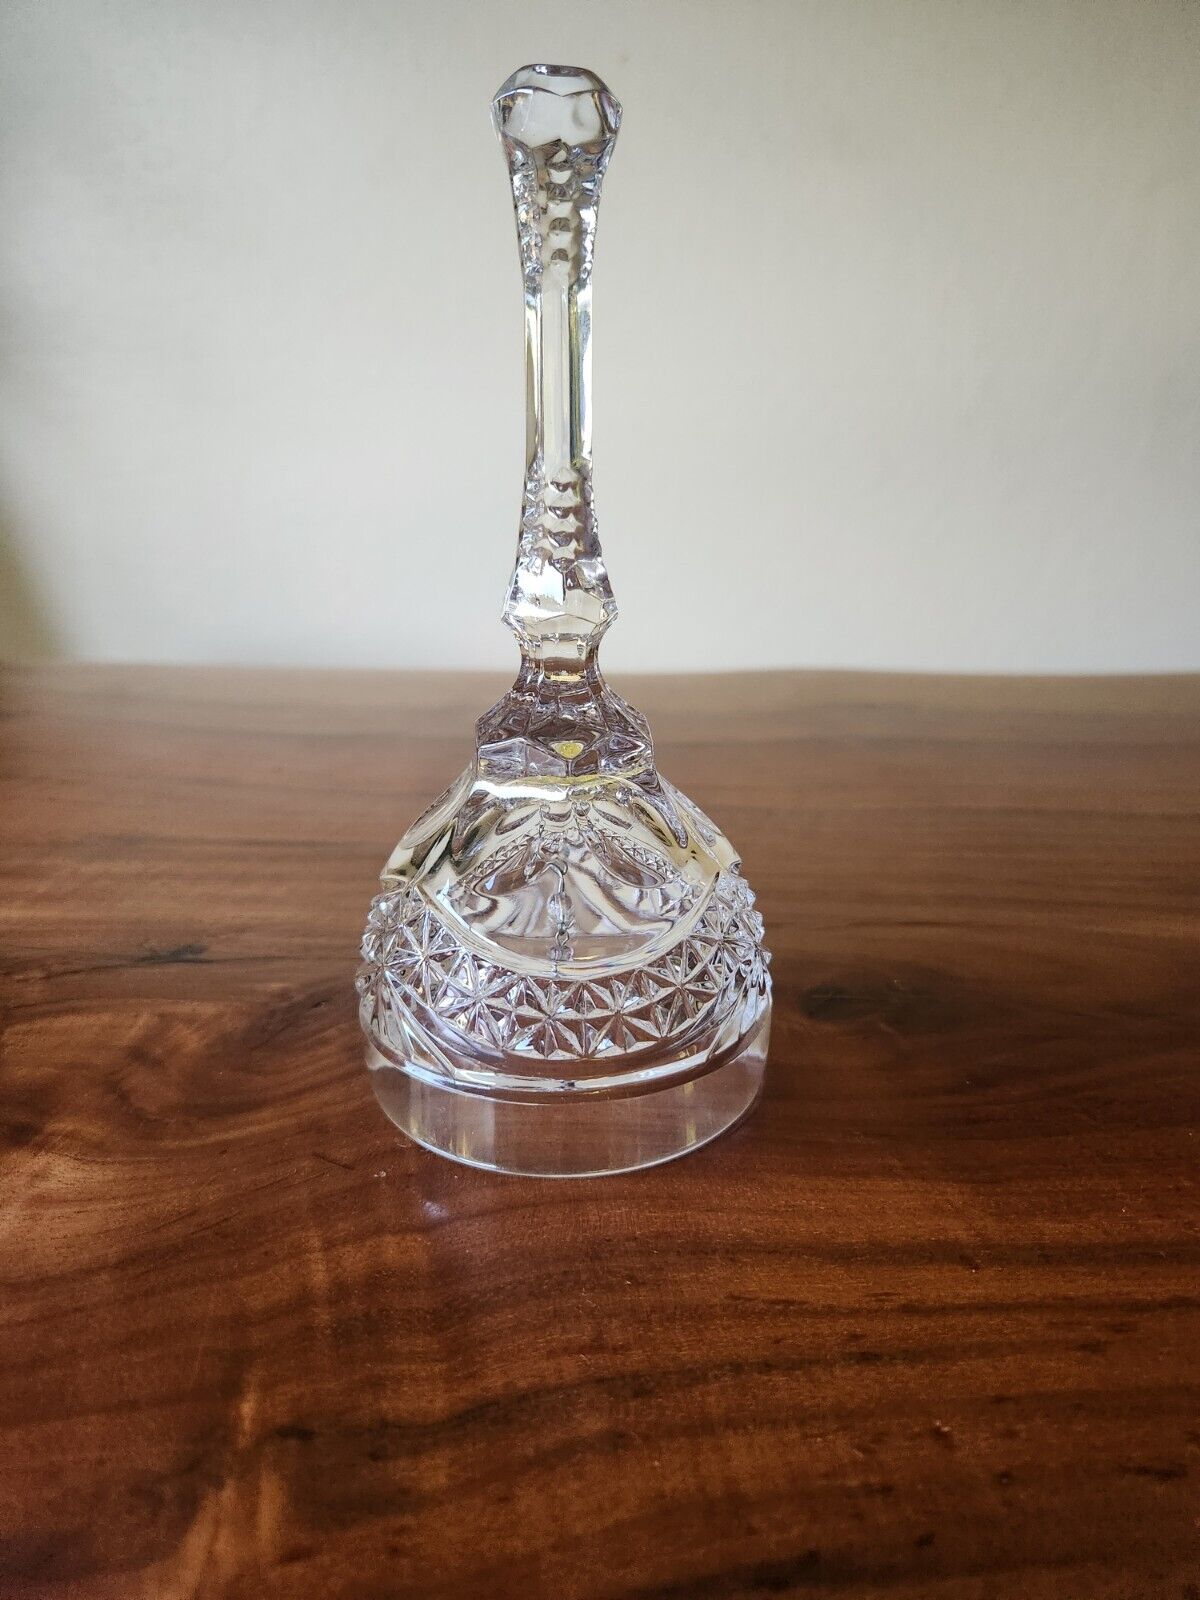 CRYSTAL Ornate Bell Clear Hand Bell Table Bell 7 inch